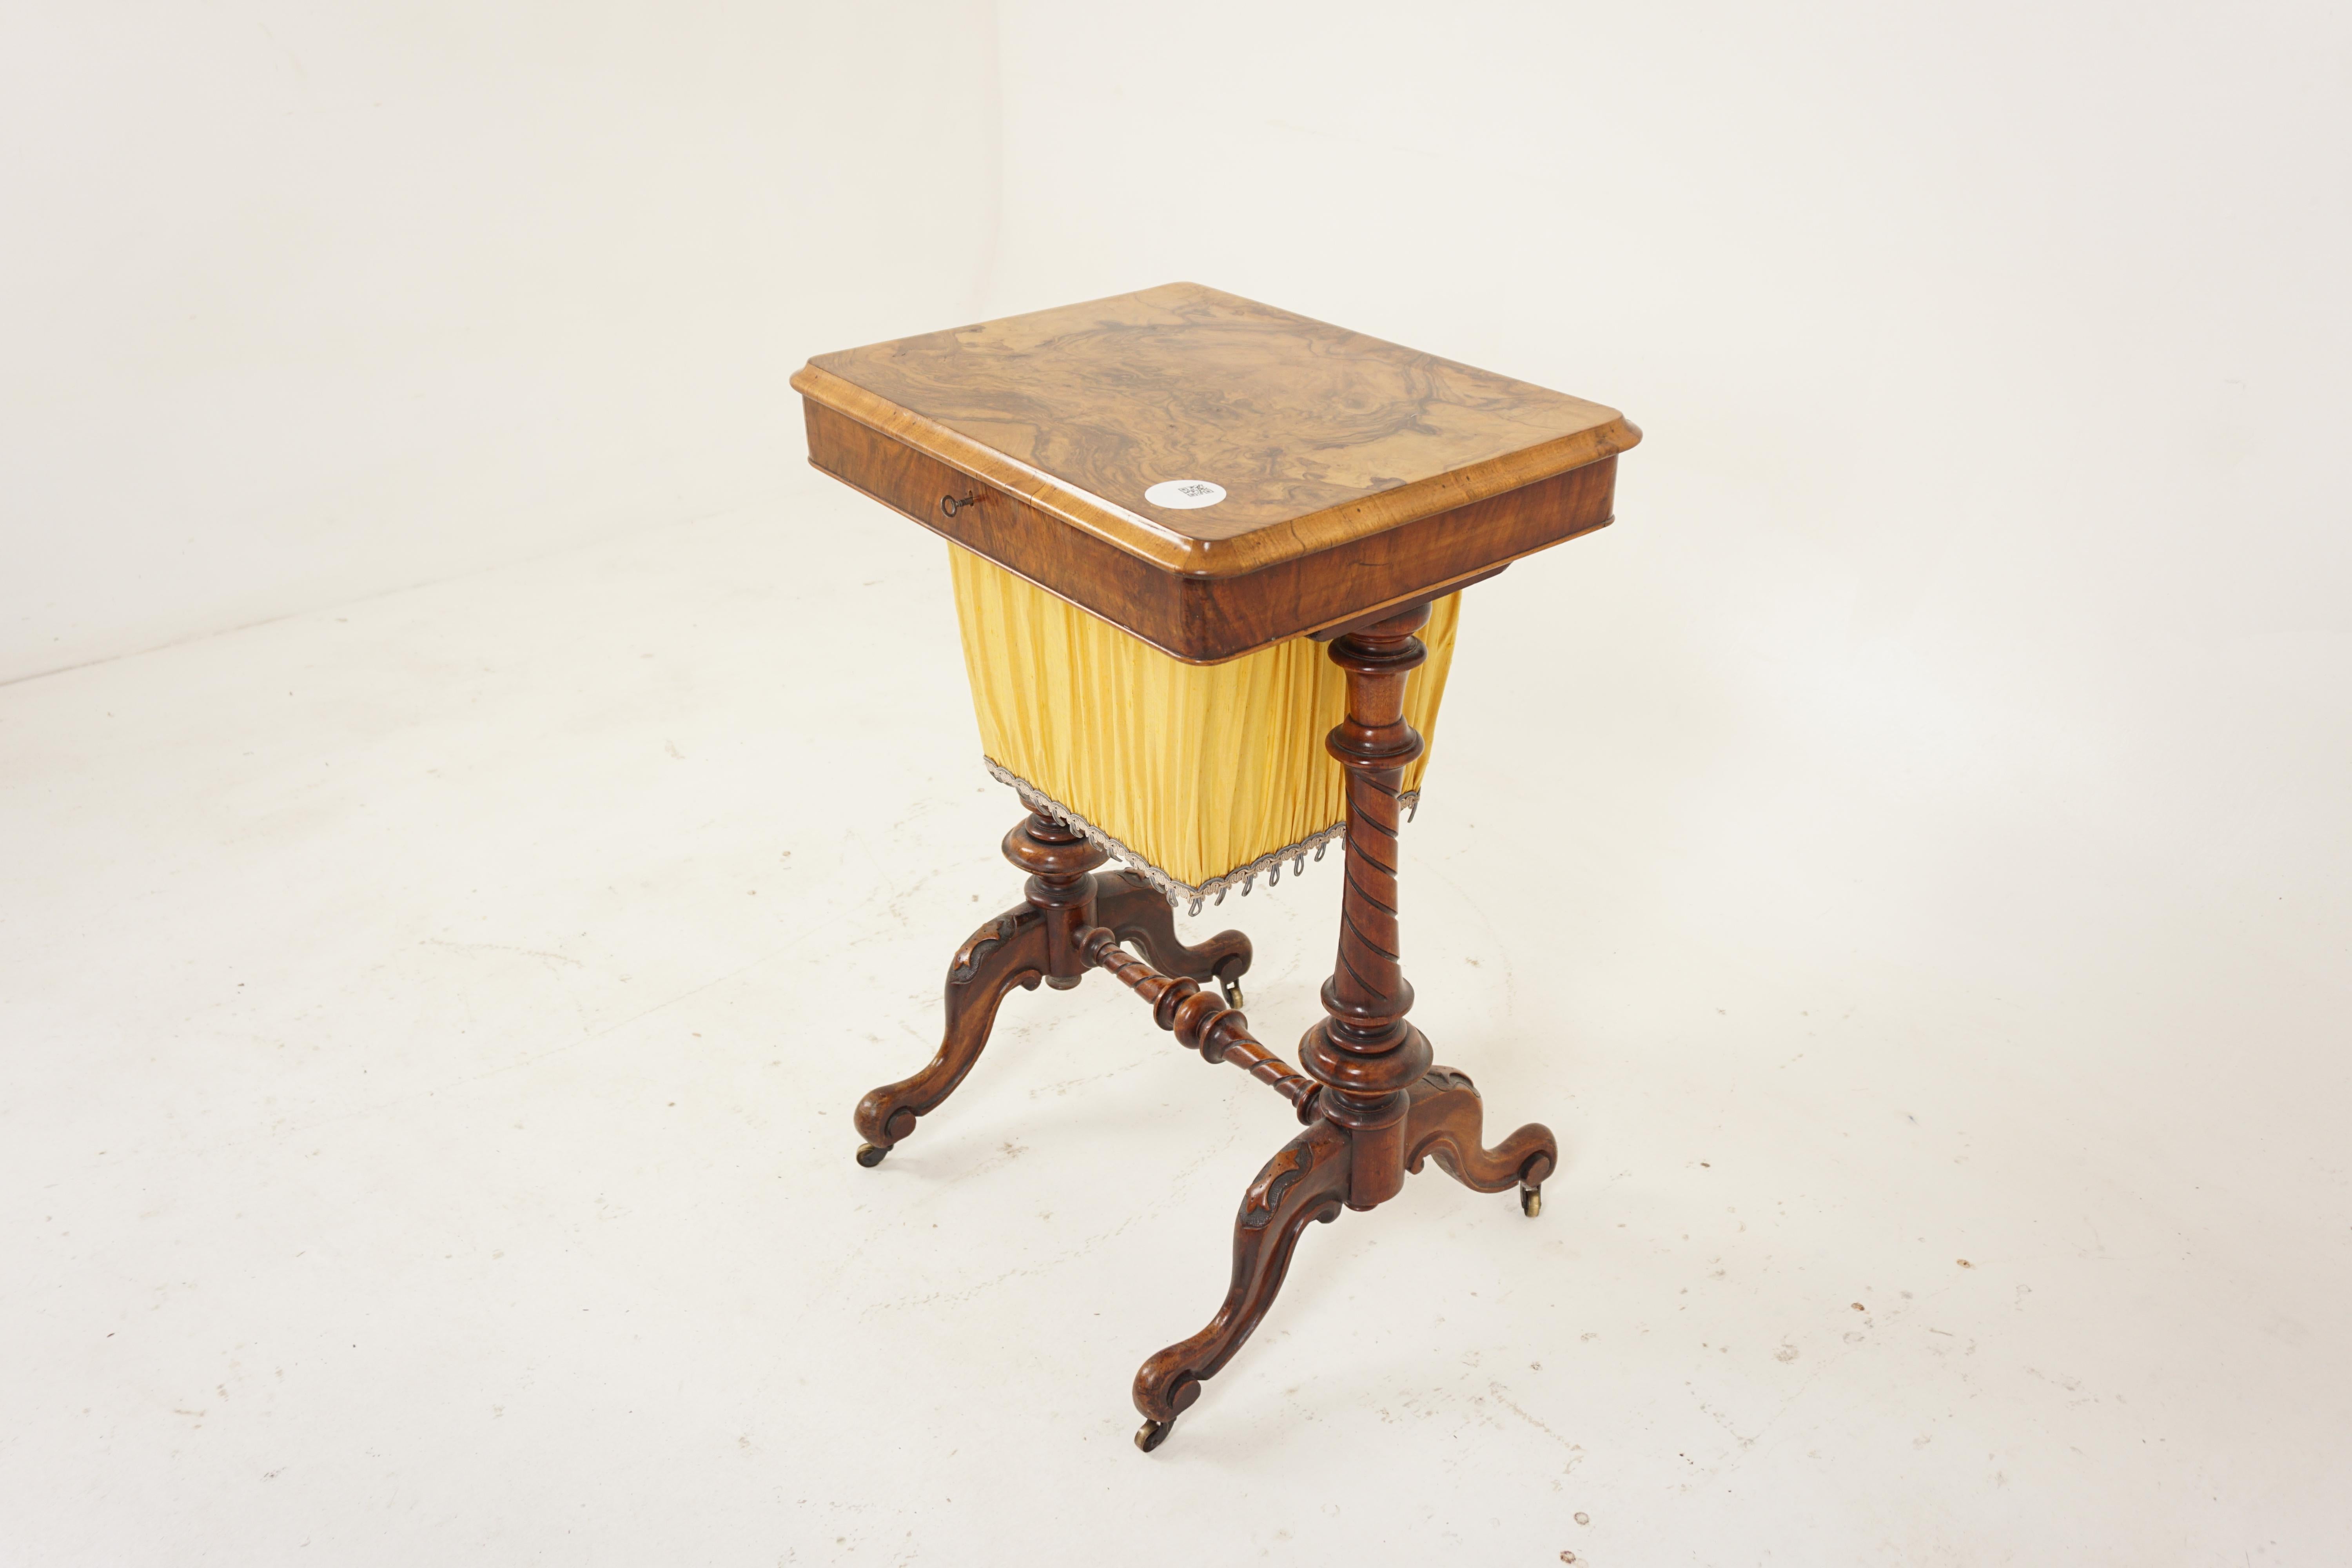 Ant. Victorian Burr Walnut Sewing Box on Carved Legs, Table, Scotland 1850, H688

Scotland 1850
Solid Walnut + Veneers
Original Finish
Beautiful veneered lift up top with moulded edge
Fitted with intricate cubby holes
With silk pleated sewing box